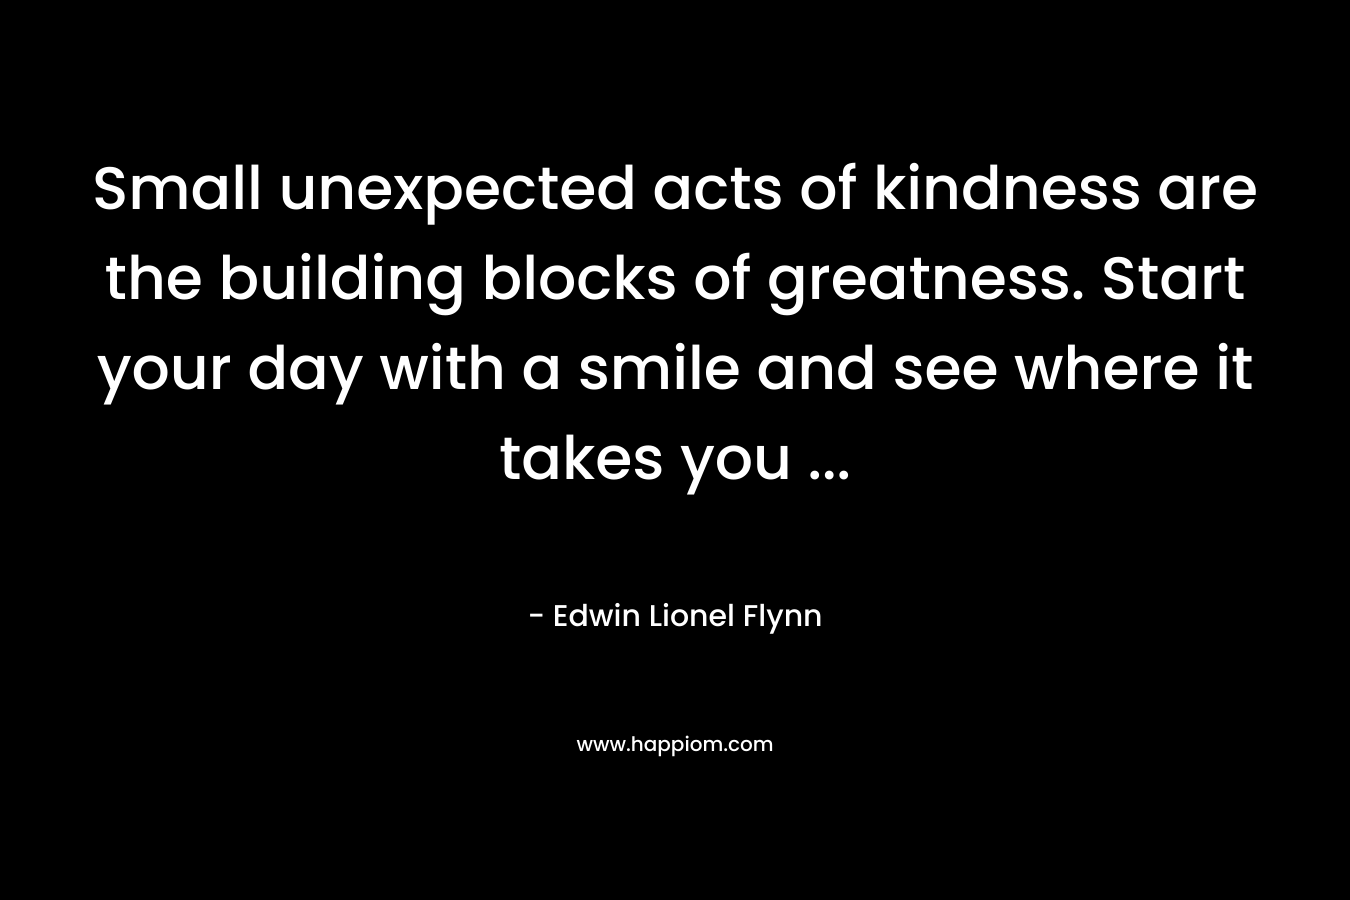 Small unexpected acts of kindness are the building blocks of greatness. Start your day with a smile and see where it takes you ...